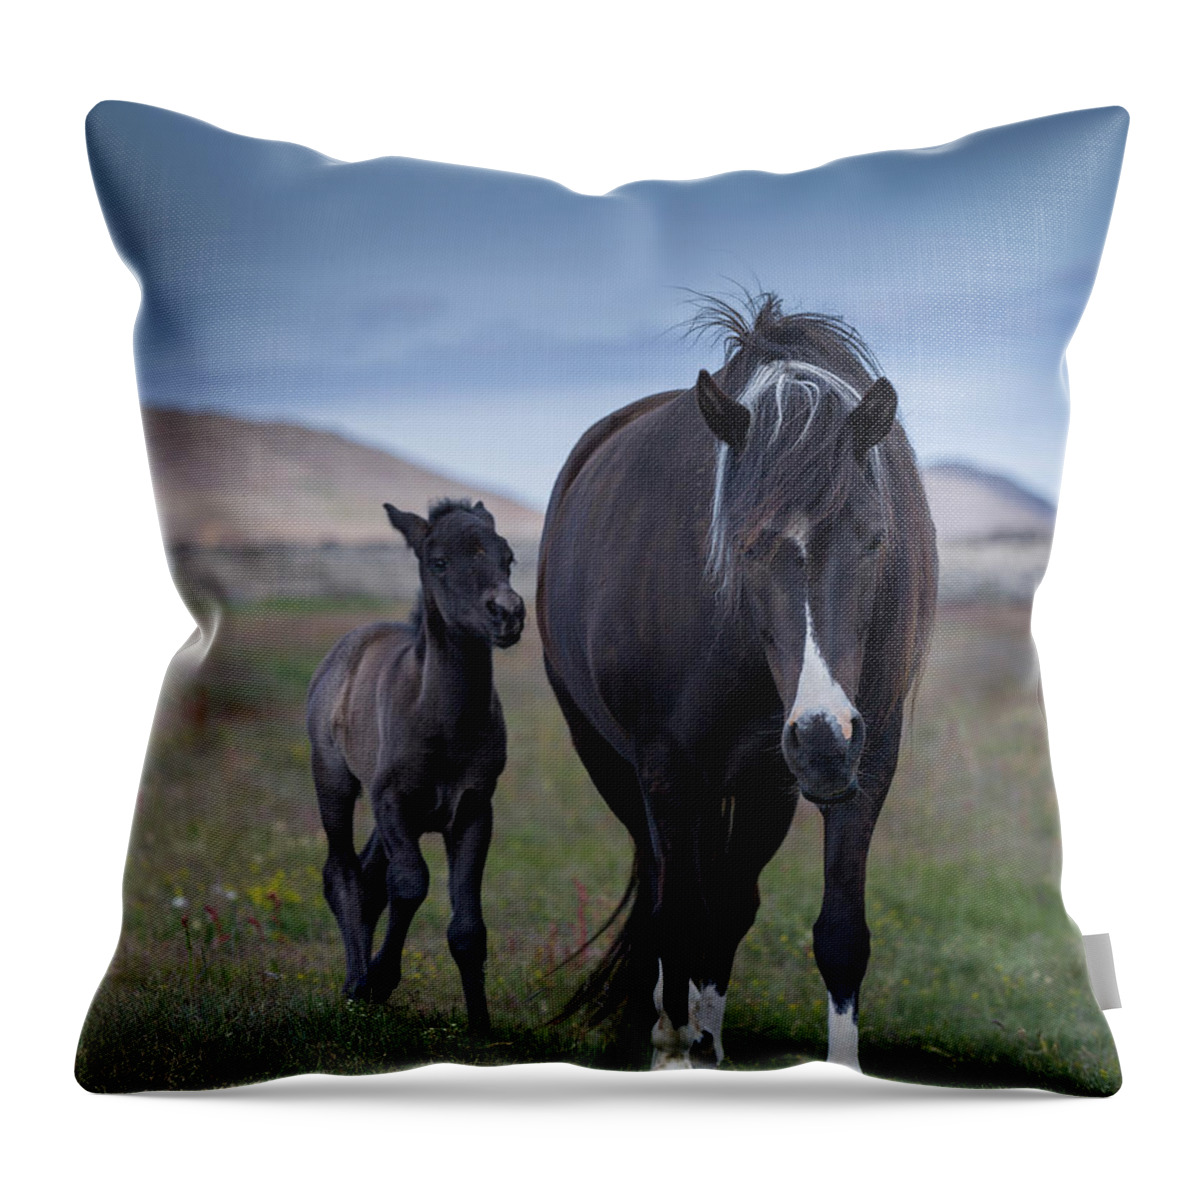 Horse Throw Pillow featuring the photograph Mare And Foal #1 by Arctic-images